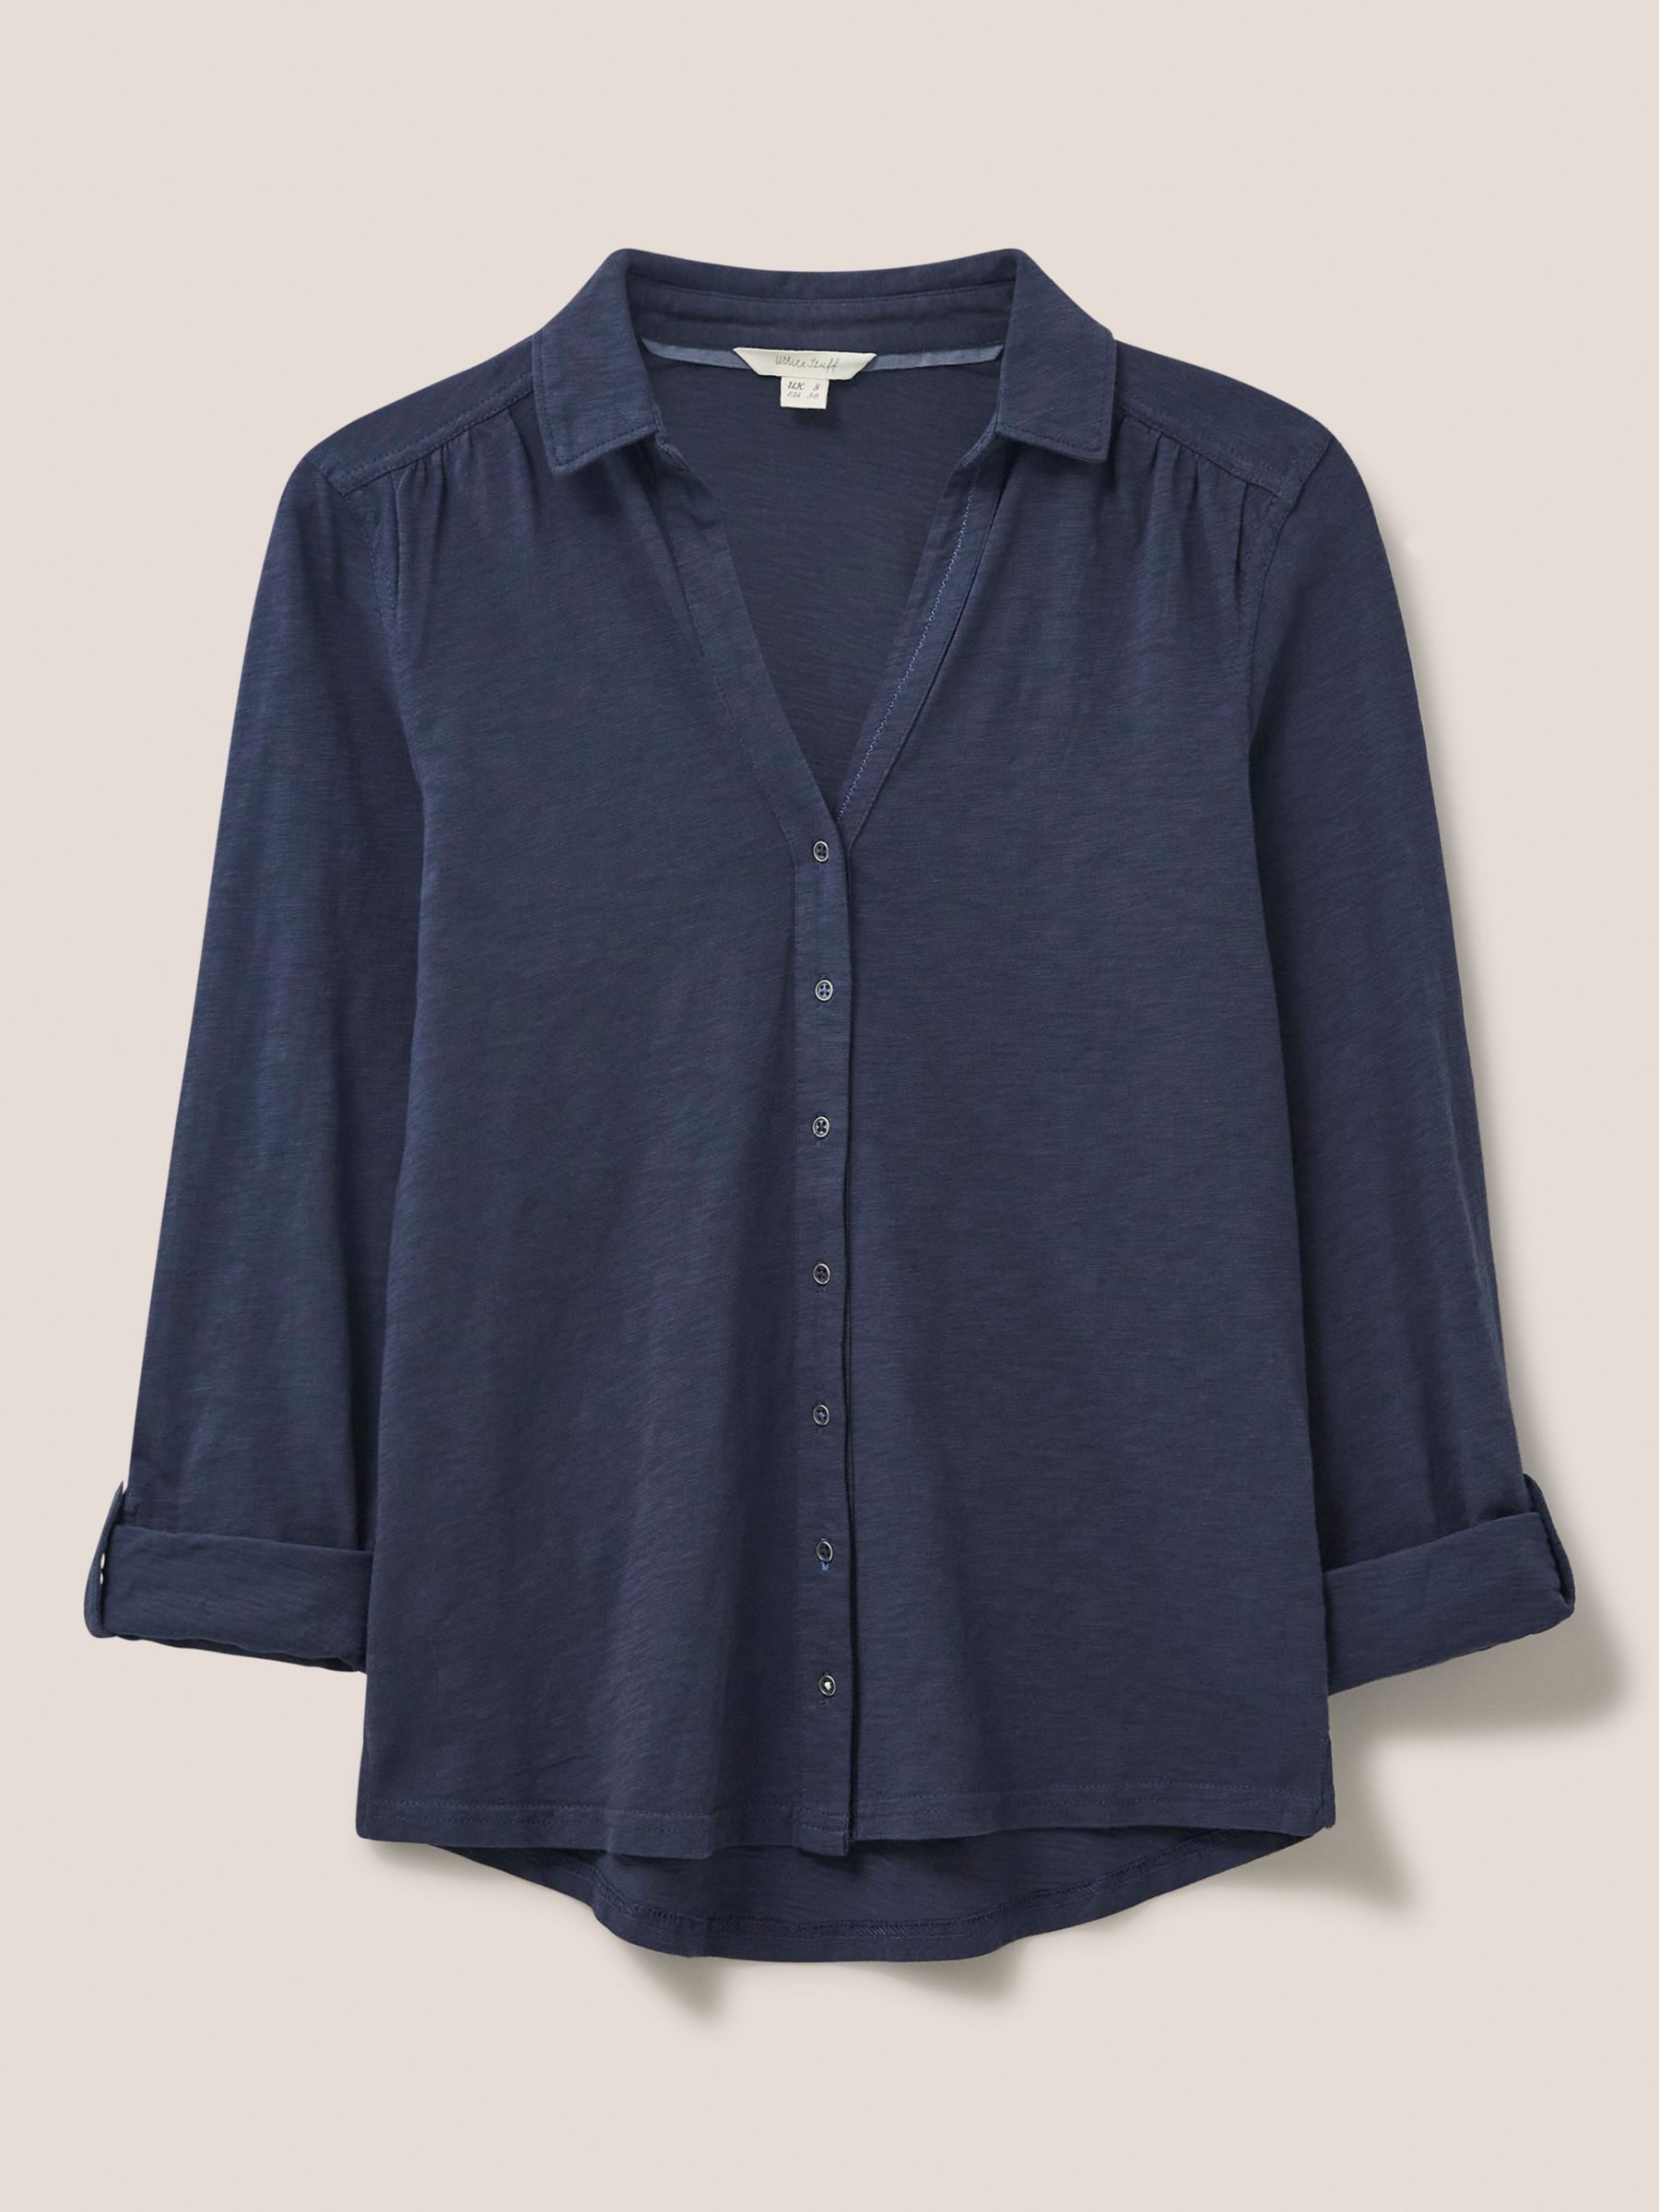 White Stuff Annie Jersey Shirt, French Navy at John Lewis & Partners